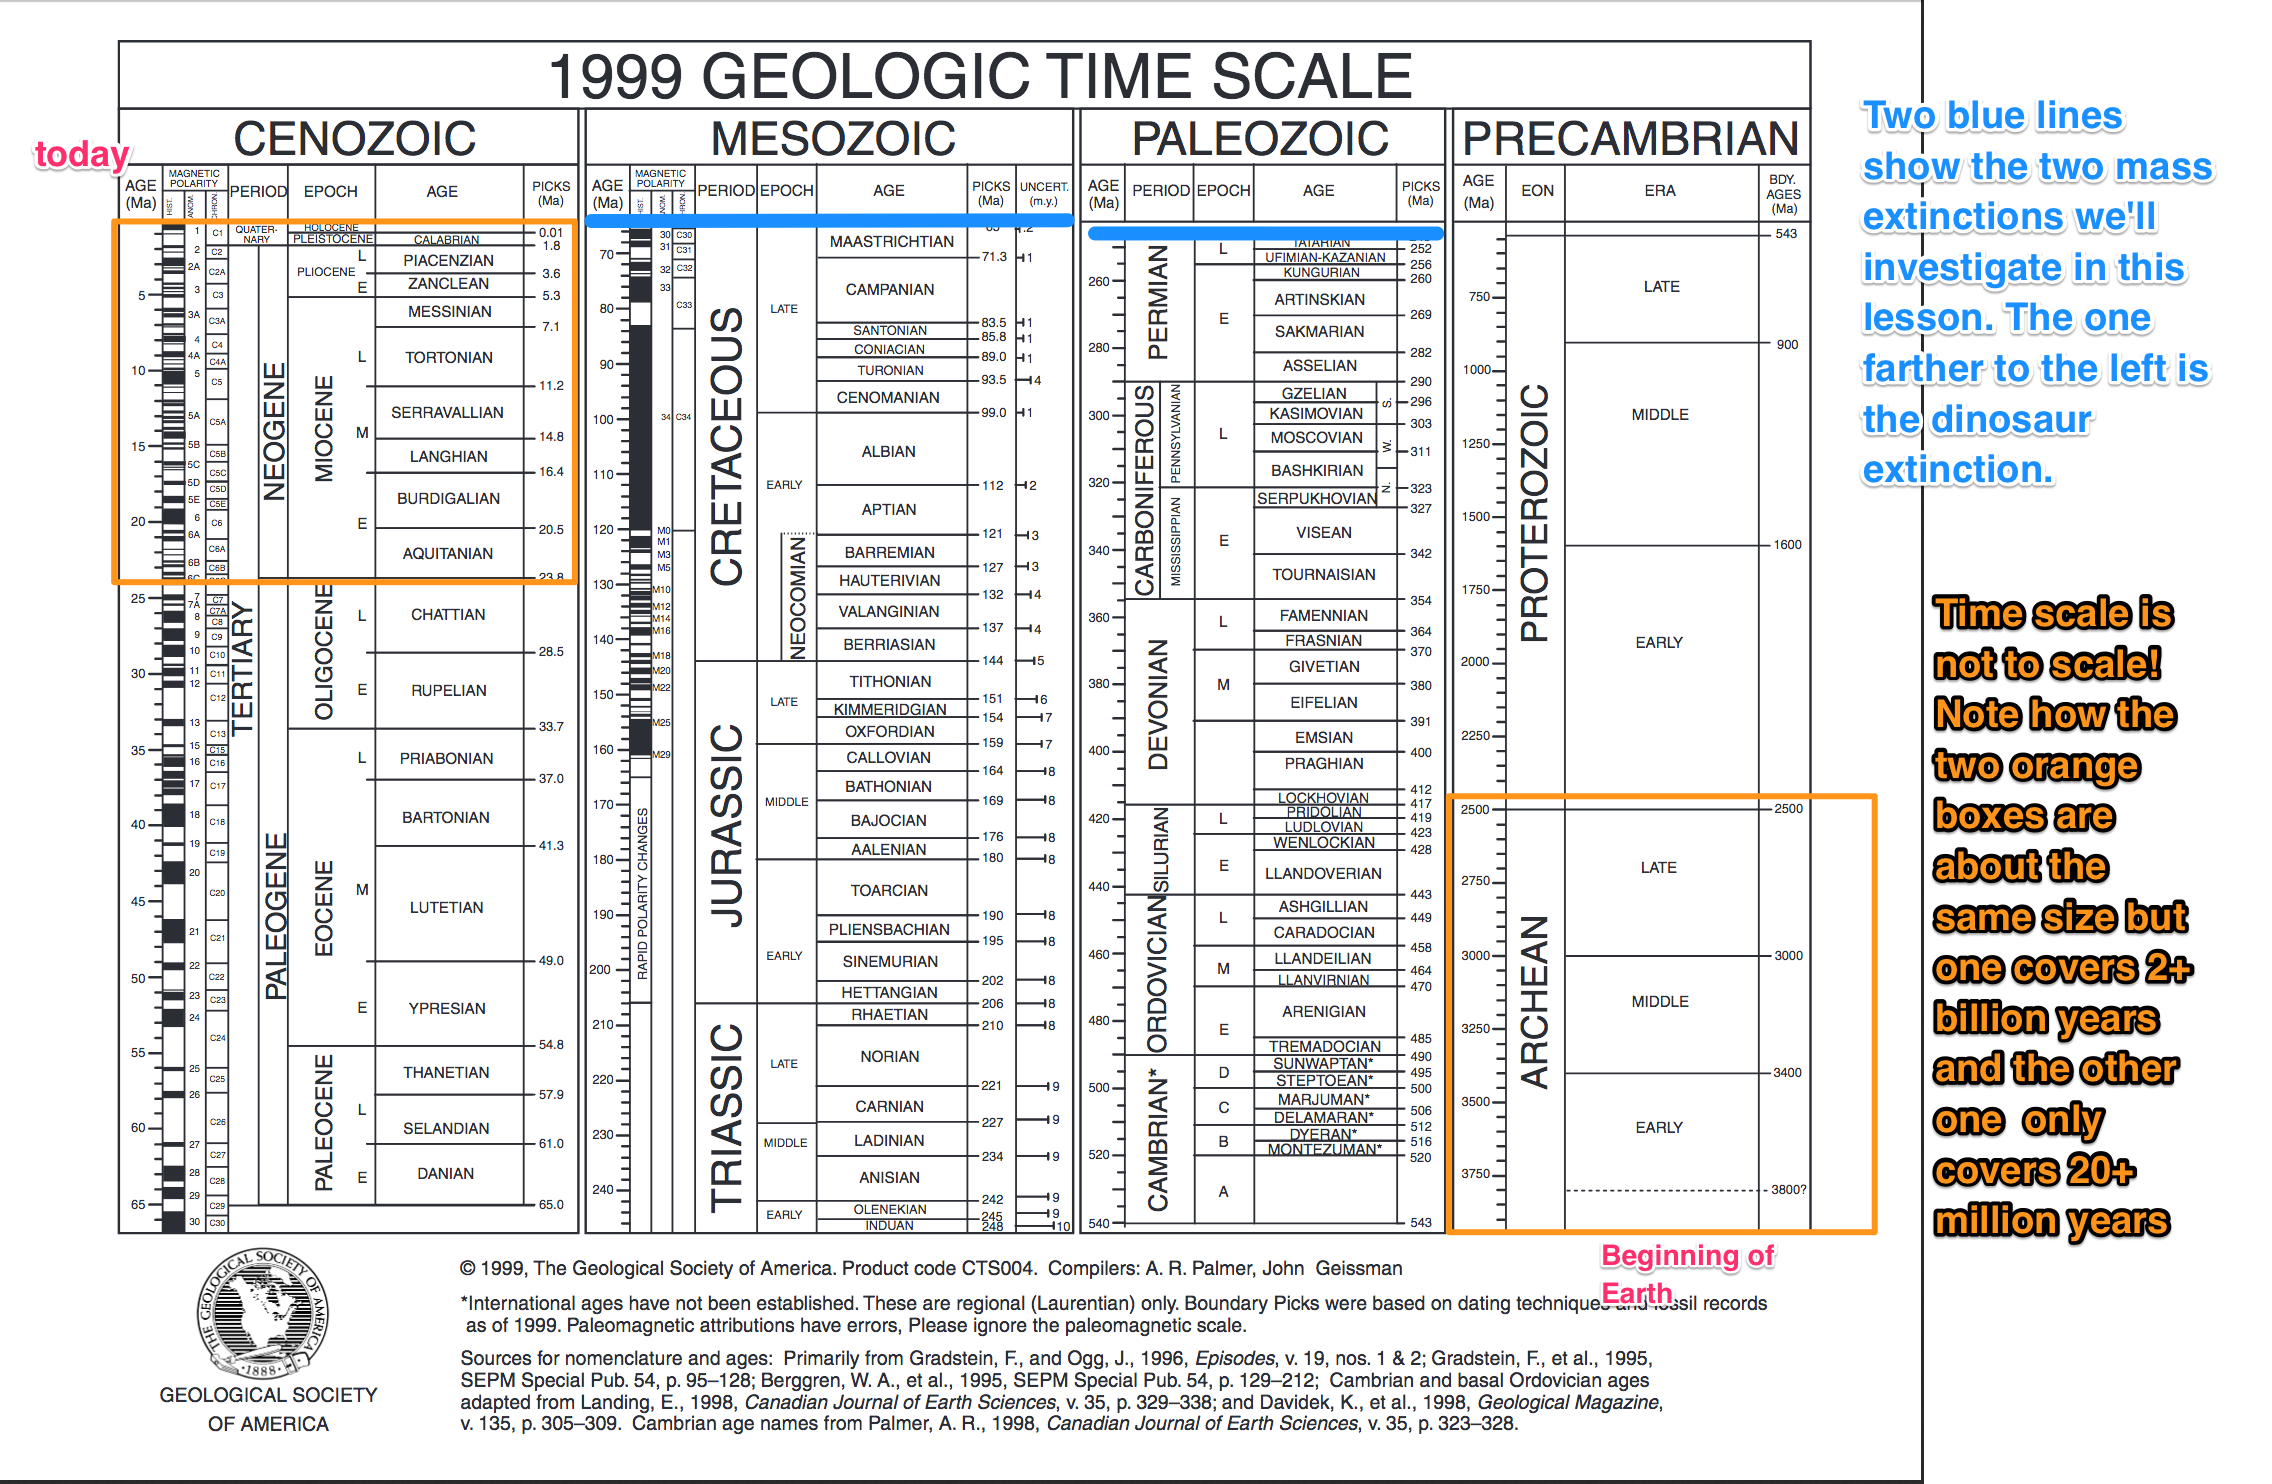 marked up version of GSA 1999 geologic time scale